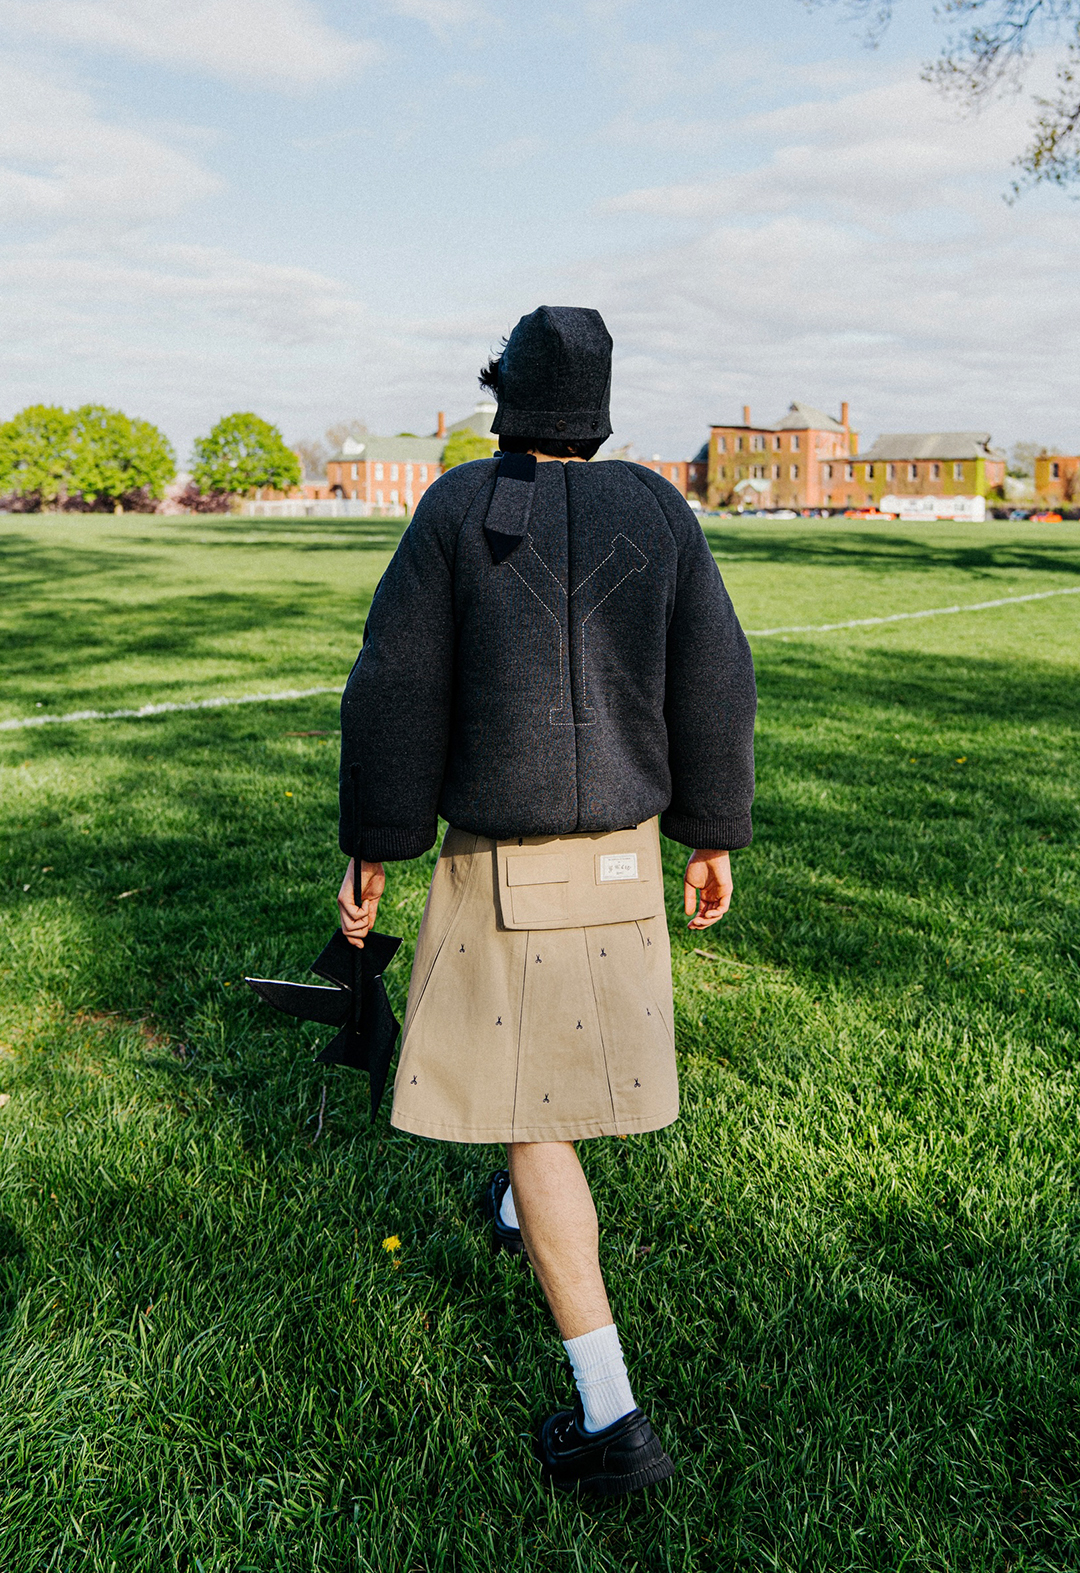 The photo shows a back view of a model walking into a field.